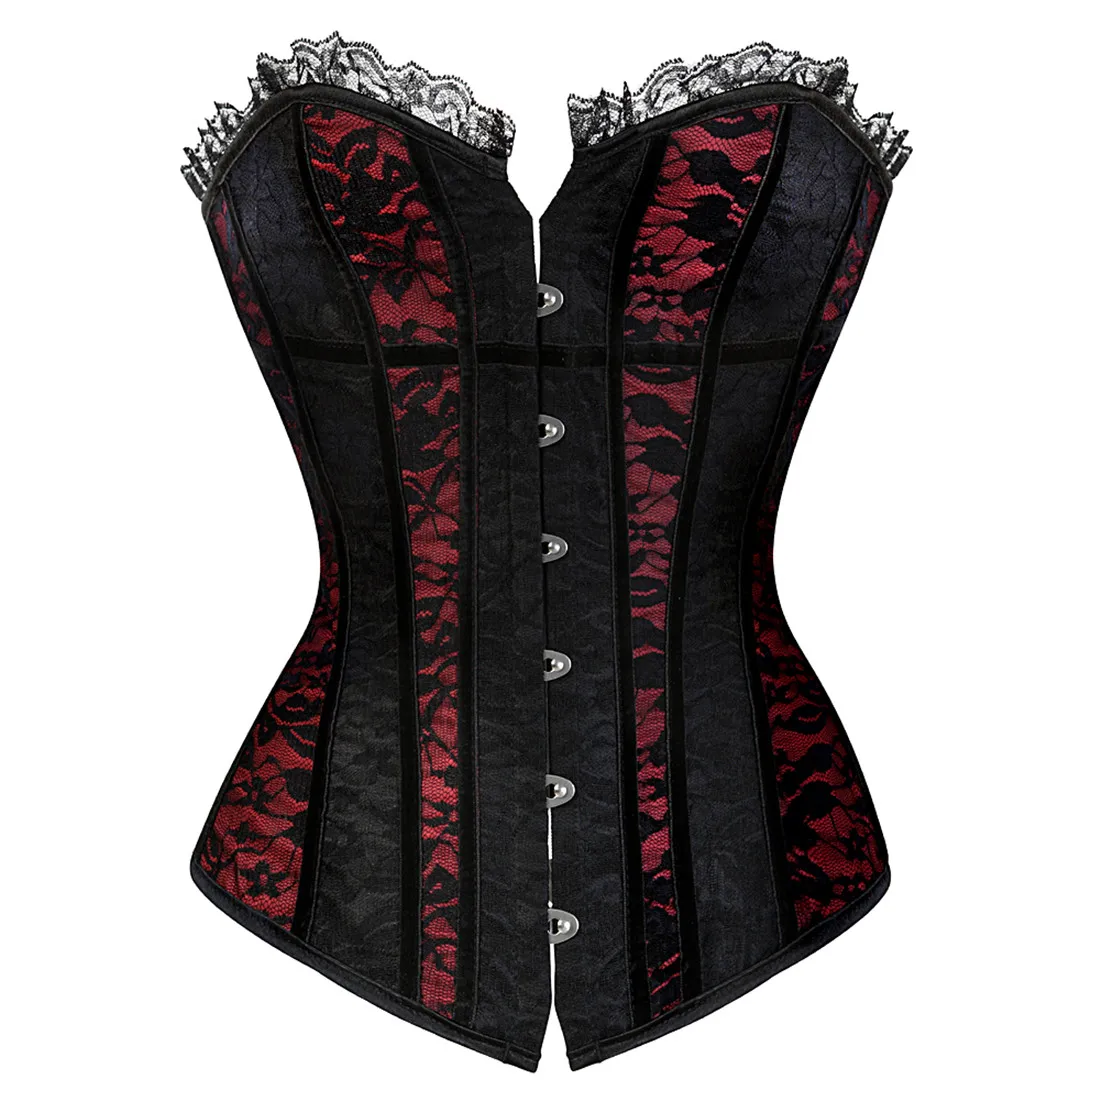 

Women's Lace Cover Overbust Corset Lace Up Boned Lingerie Zipper Side Carnival Waist and Body Shaper Bustier Plus Size